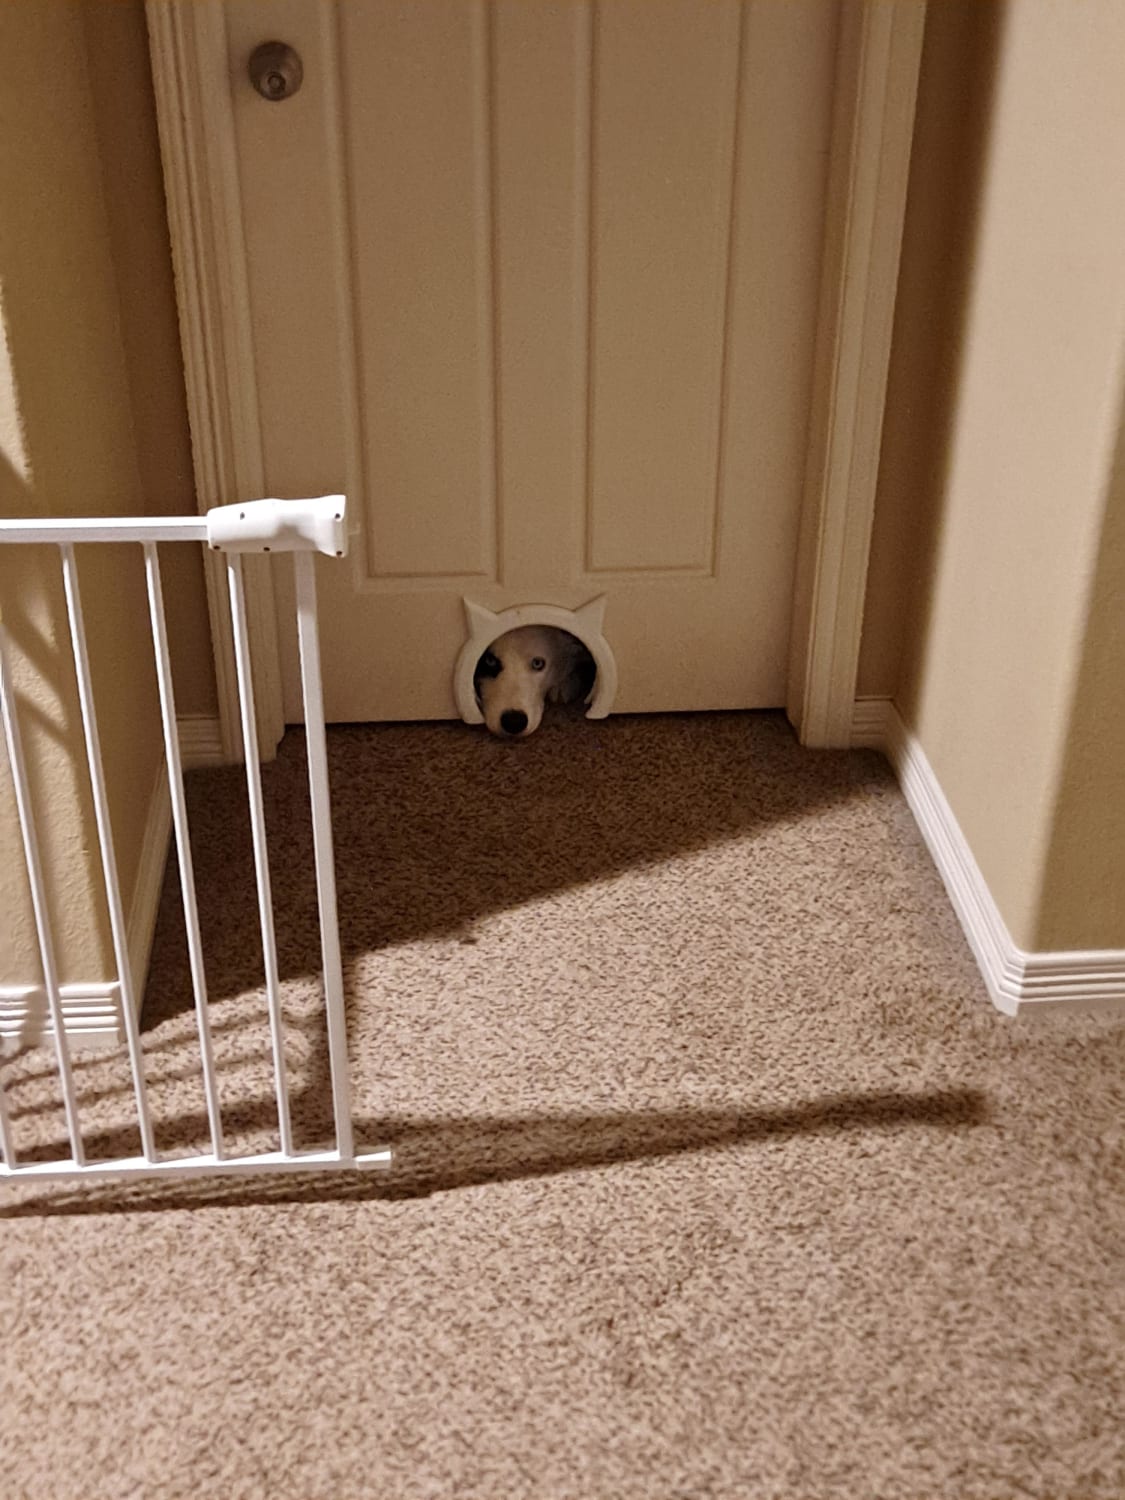 We got these cat doors for our bedrooms, and Charlie is very annoyed that he can't fit through (or hang out with mom while she's eating a midnight snack).